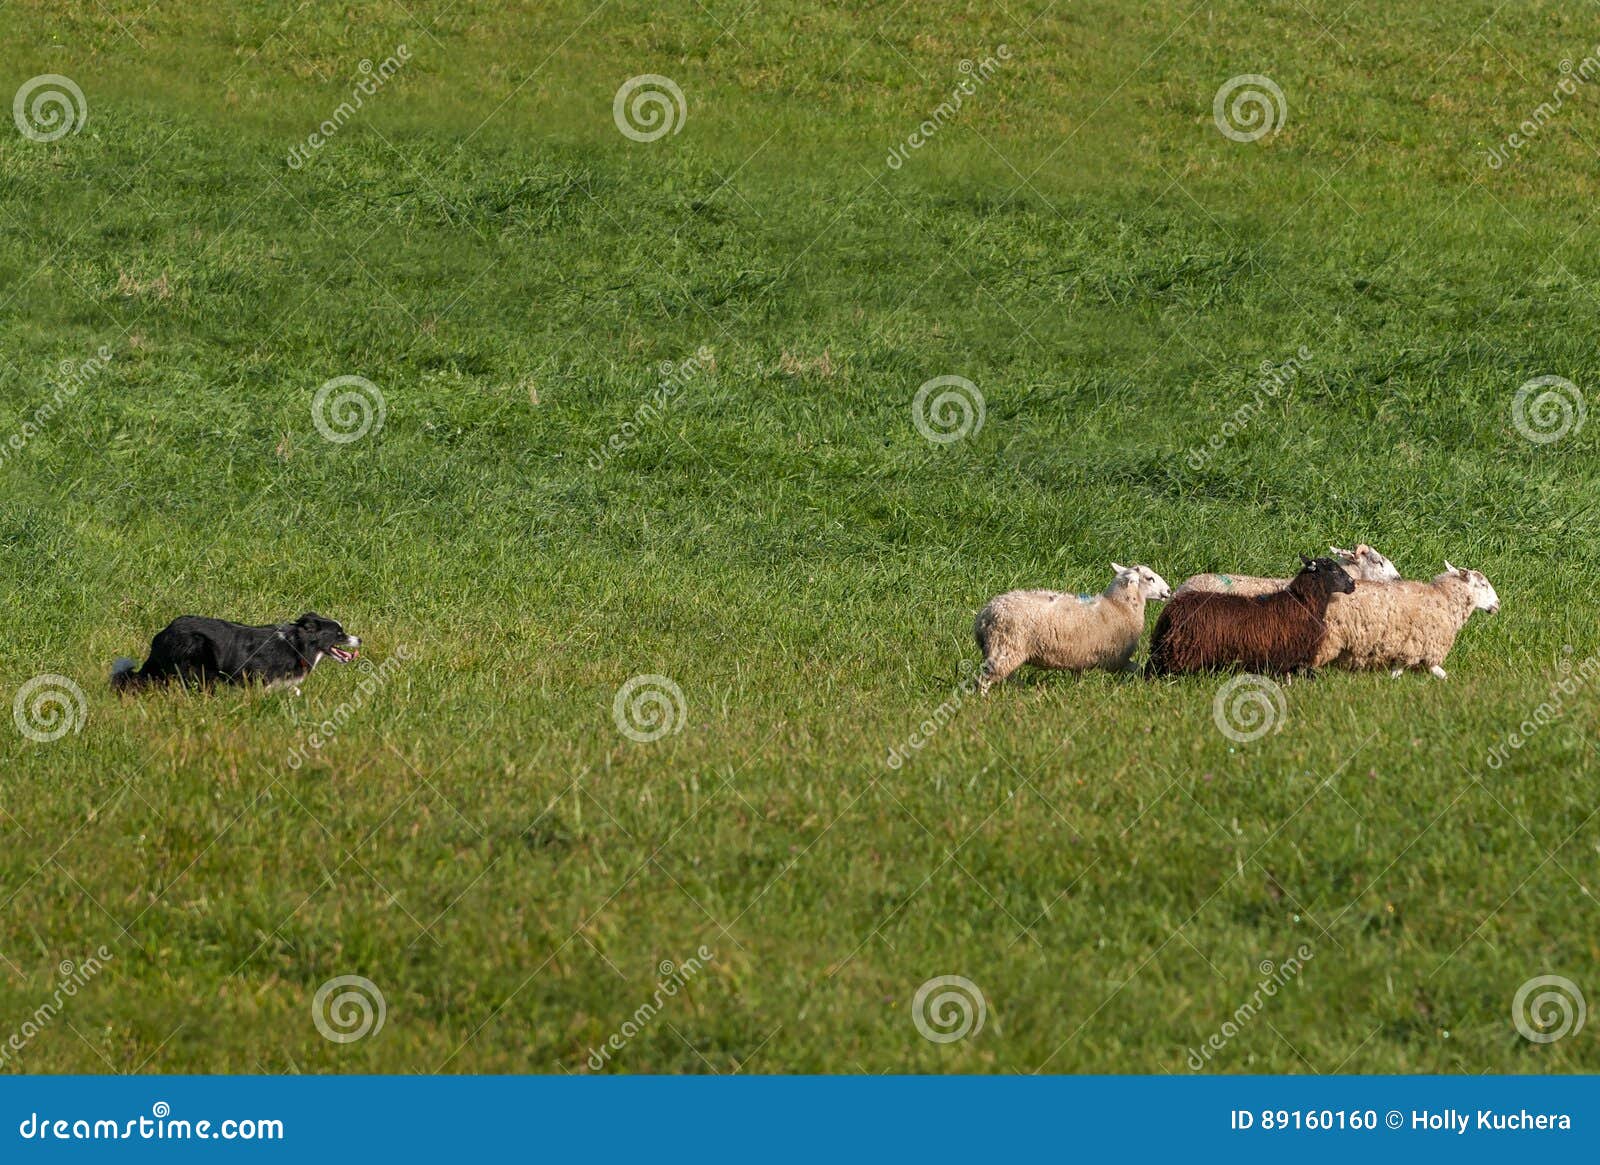 herding dog moves group of sheep ovis aries right